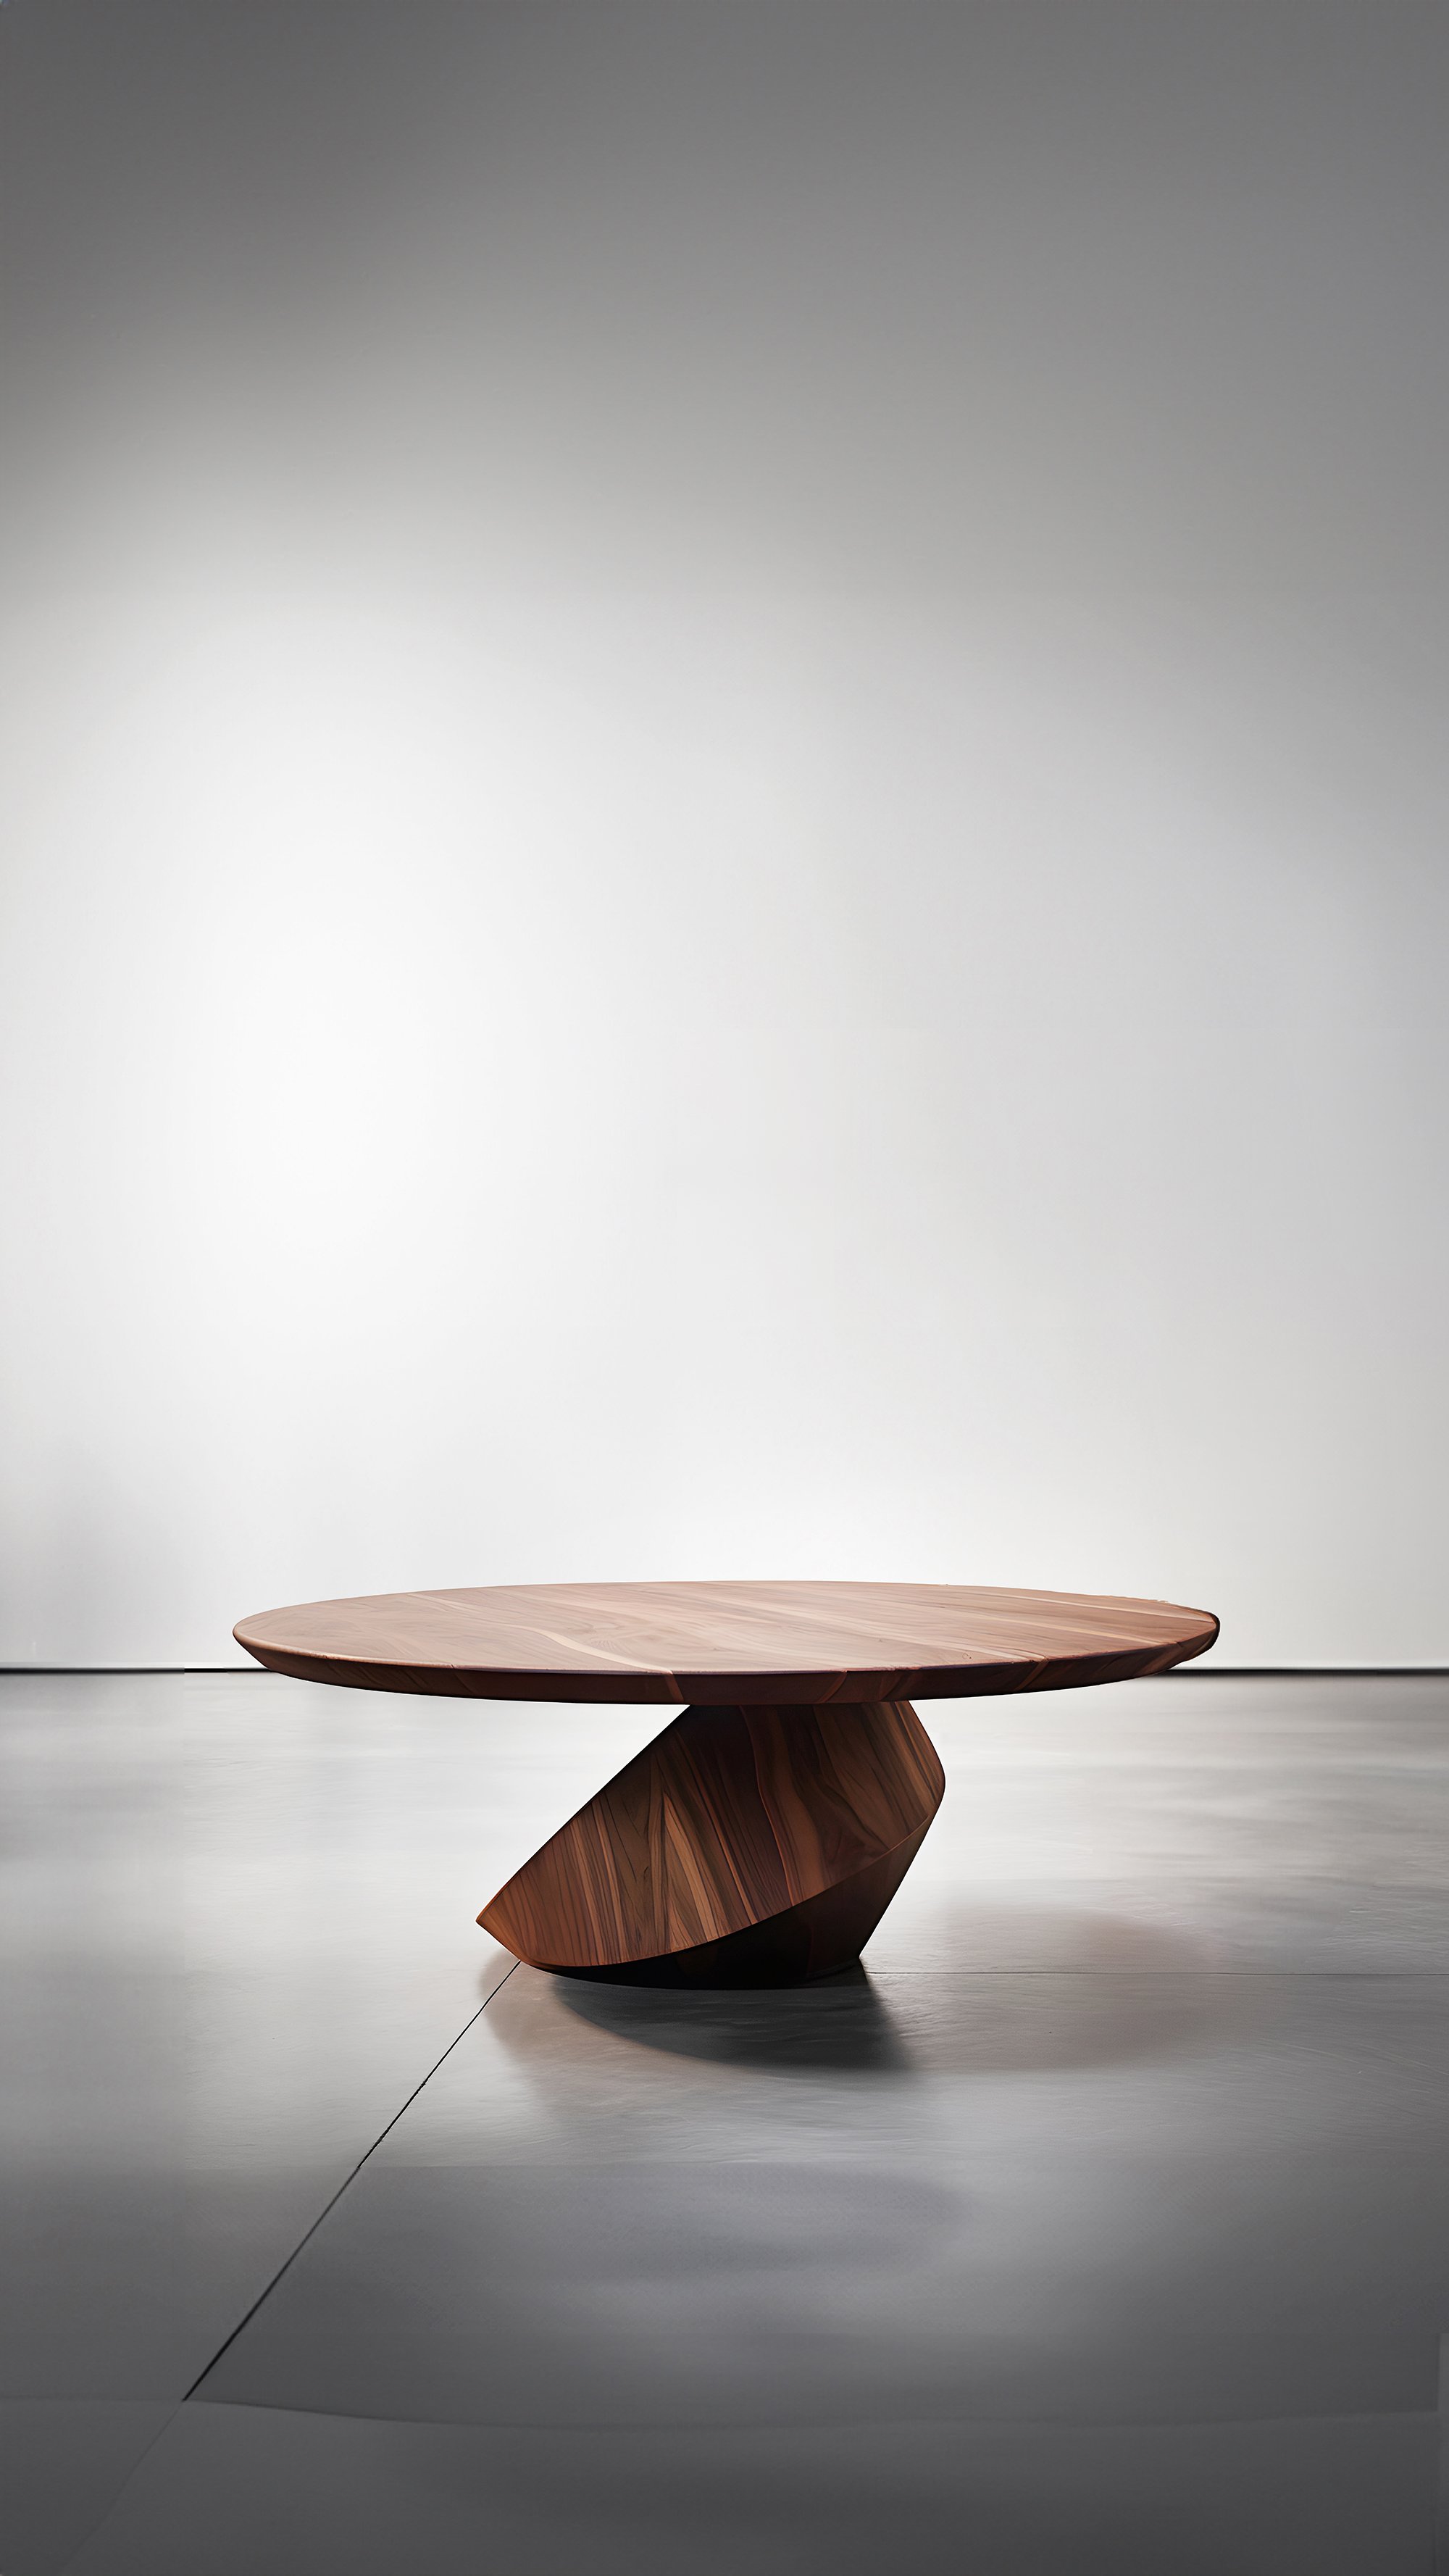 Sculptural Coffee Table Made of Solid Wood, Center Table Solace S40 by Joel Escalona — 6.jpg